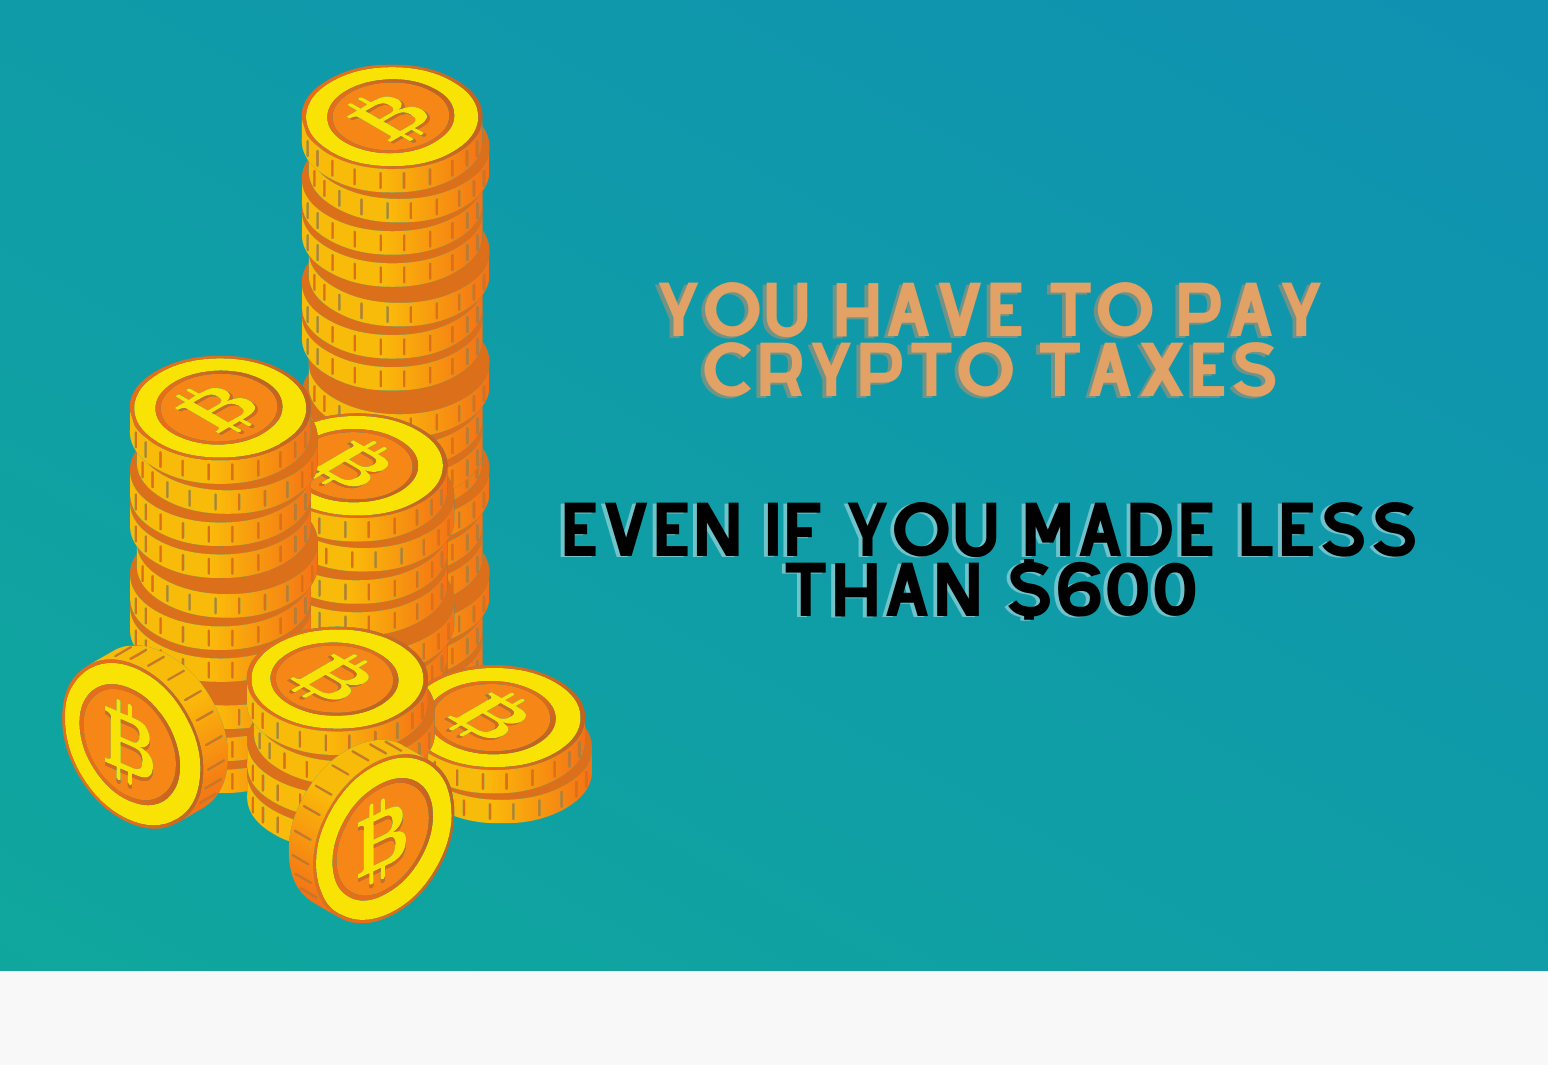 I Paid For Something With Crypto - How Do I Do My Taxes? | CoinLedger